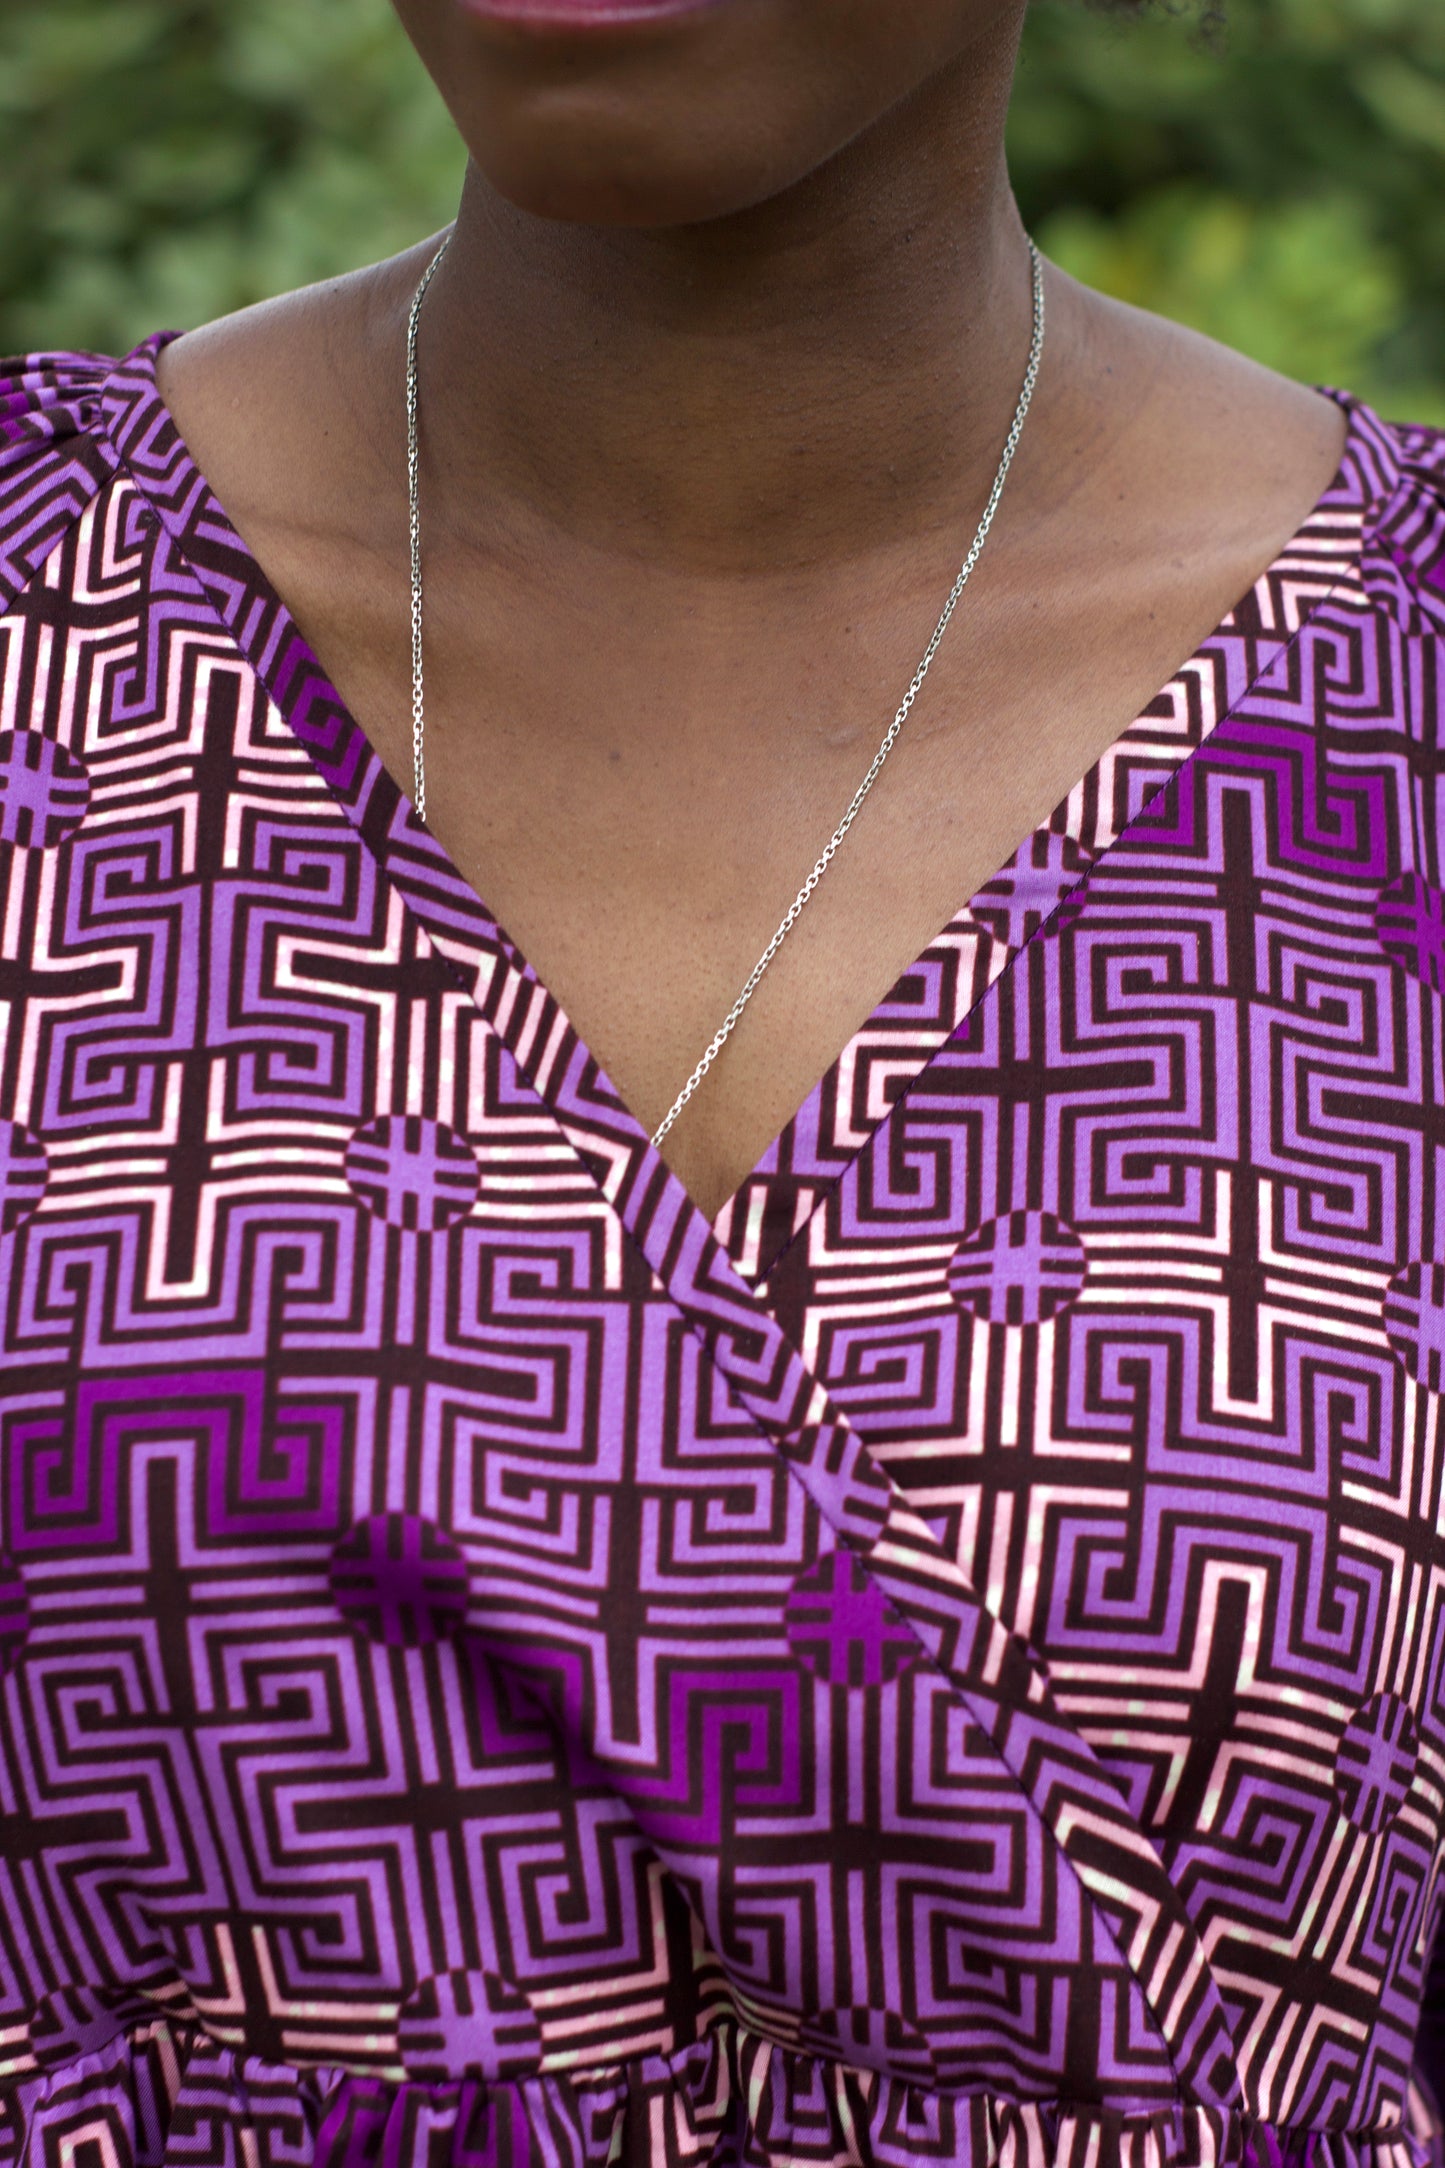 Close up of purple ruffle print dress neck line, paired with a silver long necklace.